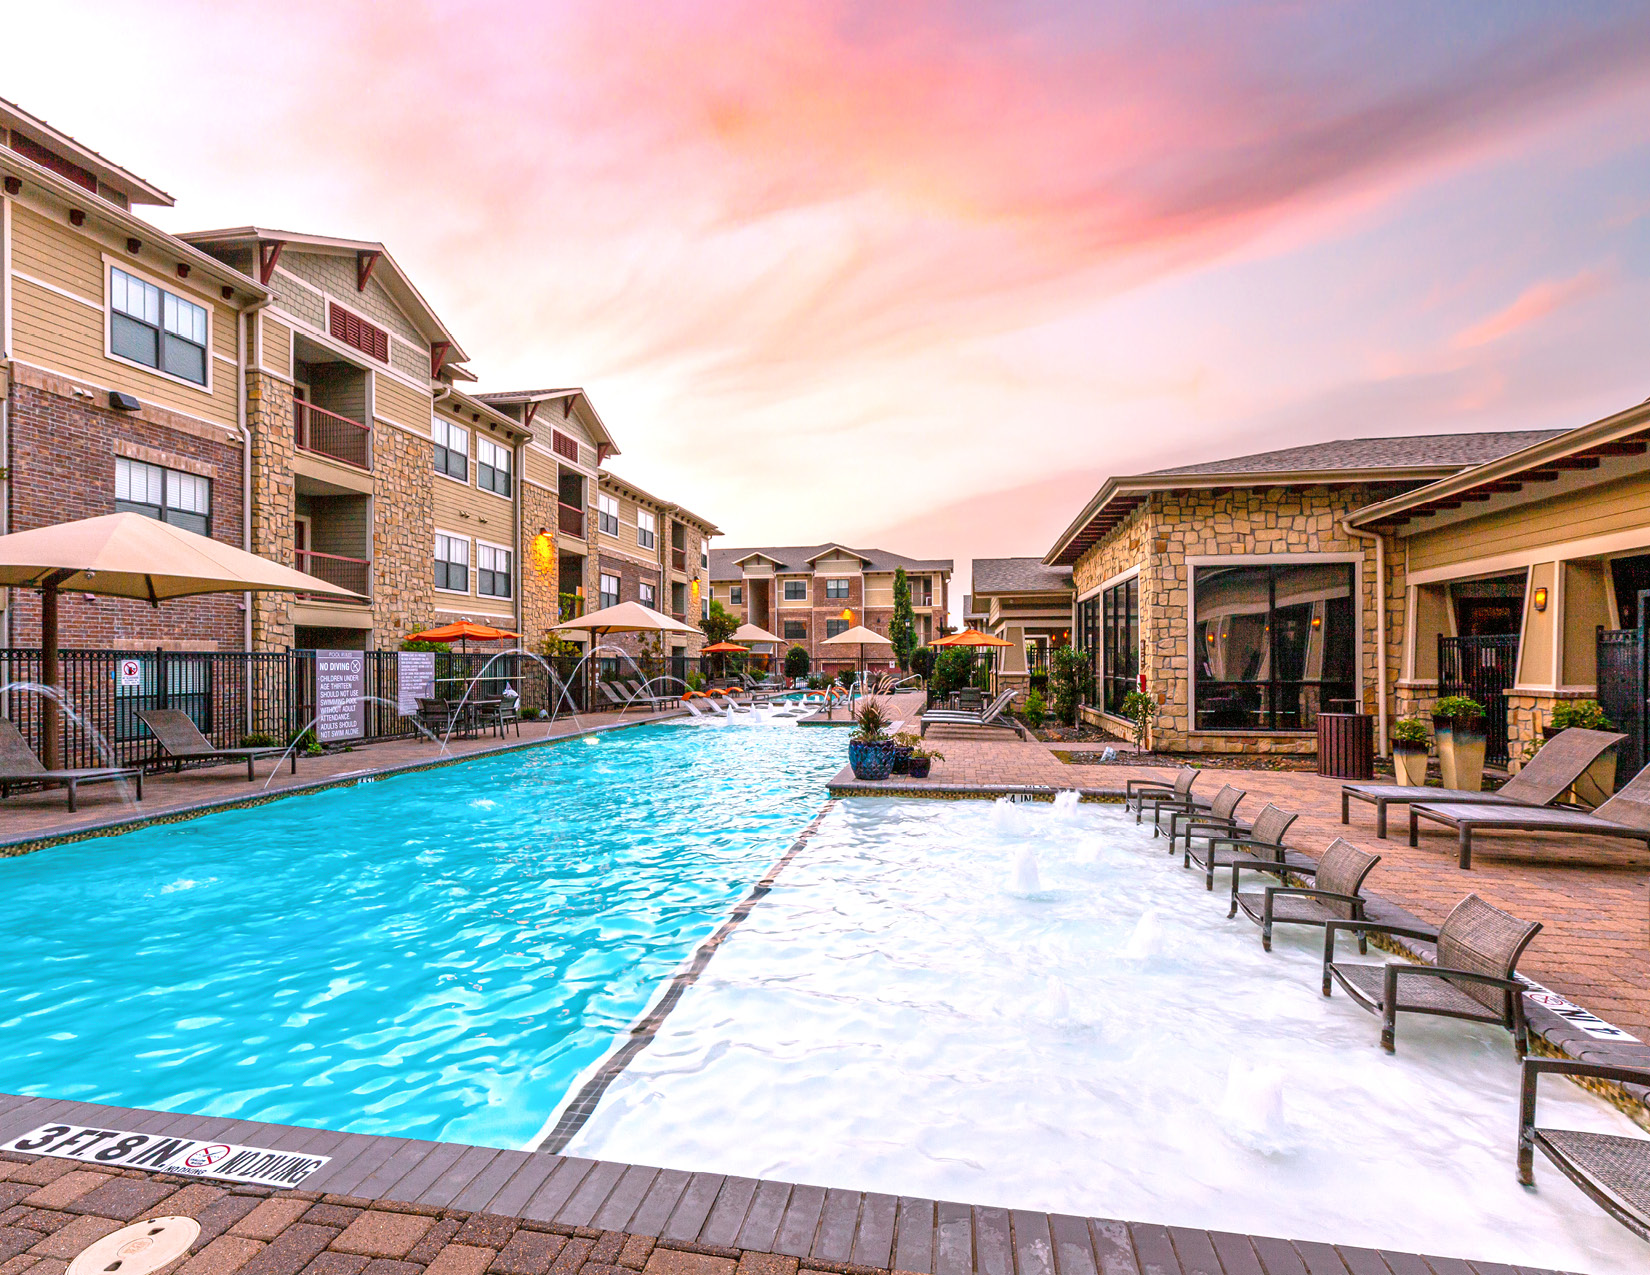 Noel Management Expands Footprint in Dallas Market With Acquisition of 268-Unit The Avenues at Carrollton Apartment Community